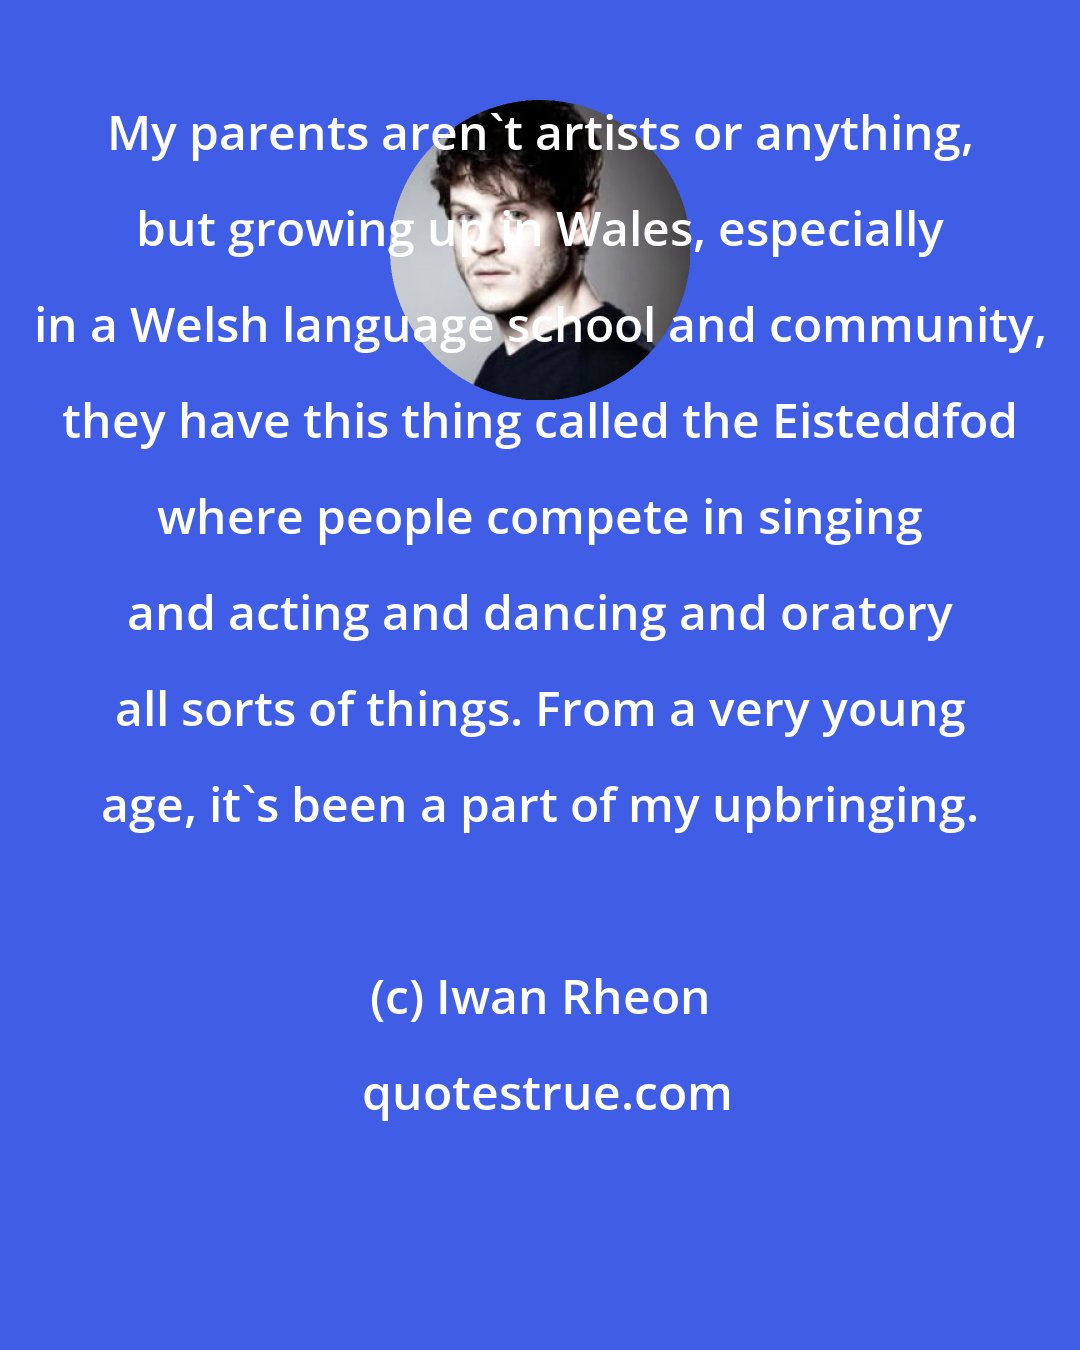 Iwan Rheon: My parents aren't artists or anything, but growing up in Wales, especially in a Welsh language school and community, they have this thing called the Eisteddfod where people compete in singing and acting and dancing and oratory all sorts of things. From a very young age, it's been a part of my upbringing.